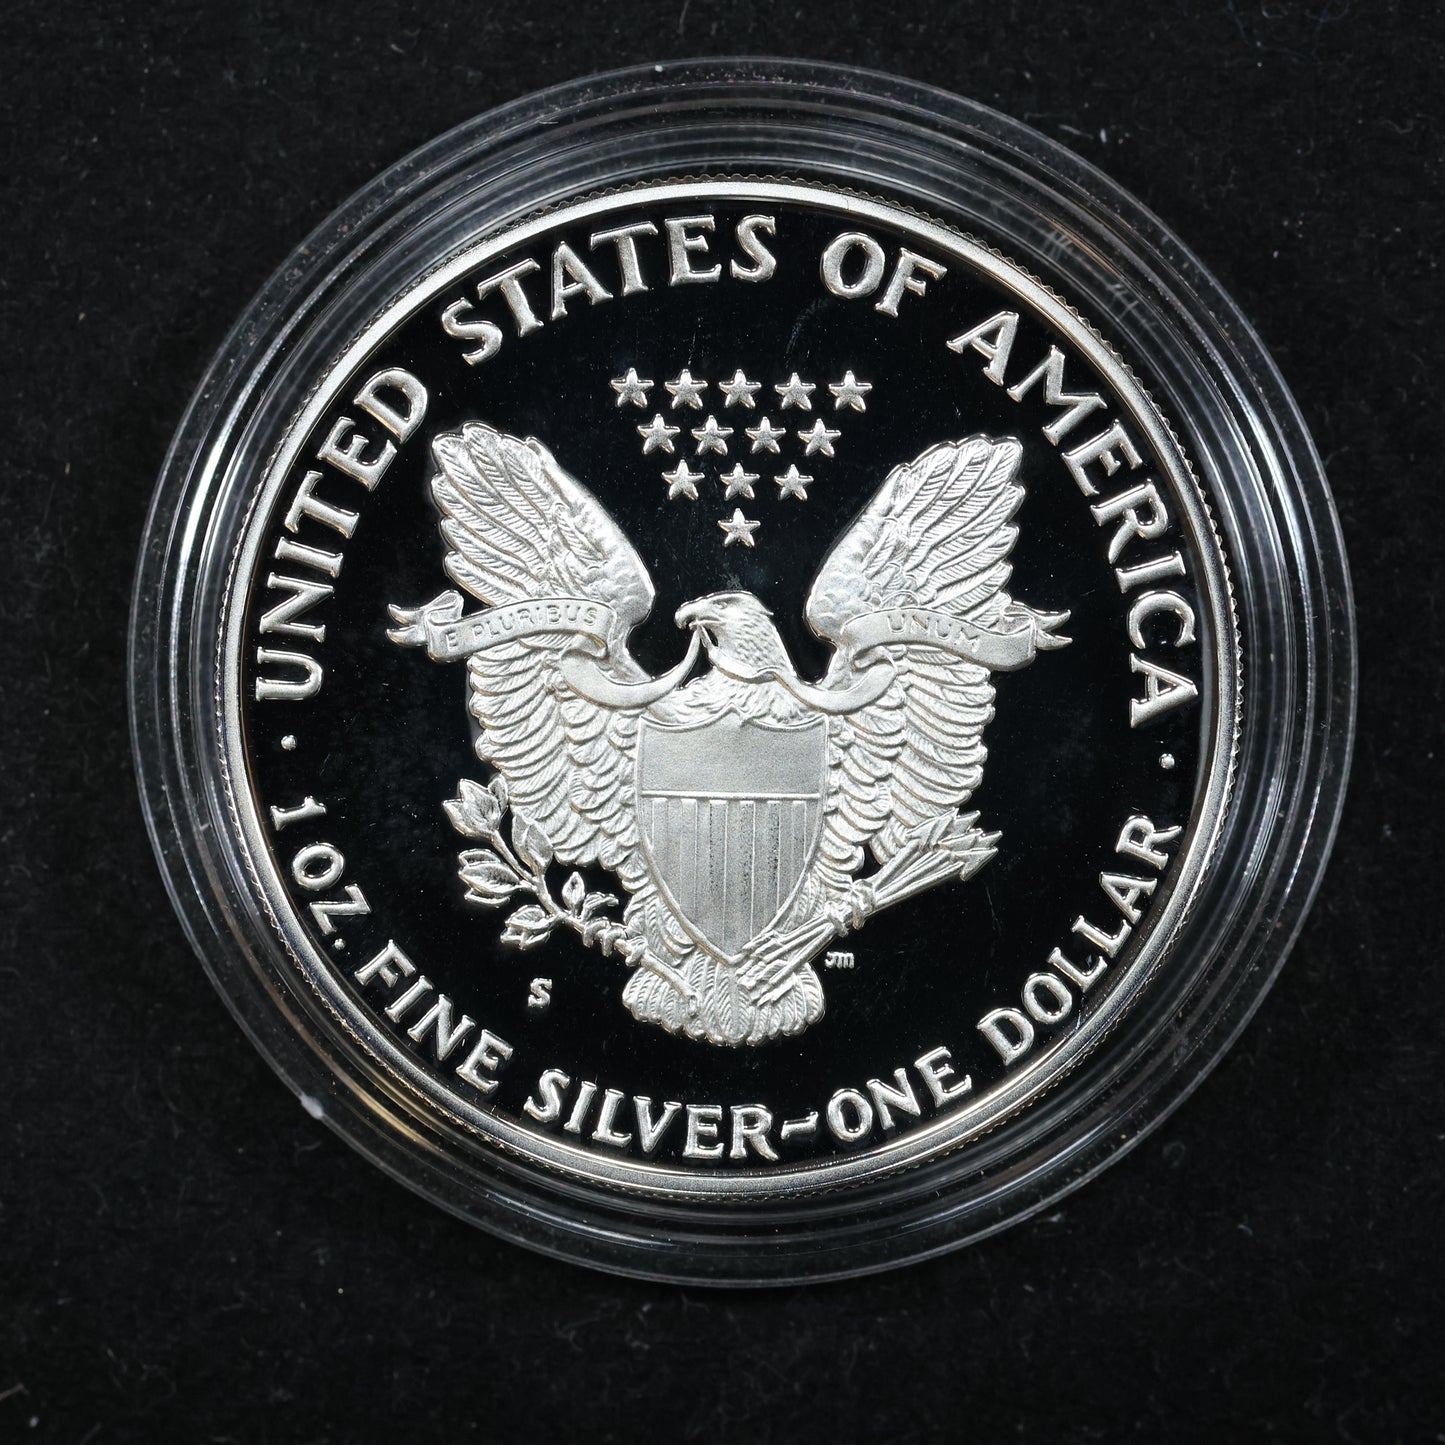 1988 S Proof Silver American Eagle 1 oz Coin Only w/ Capsule